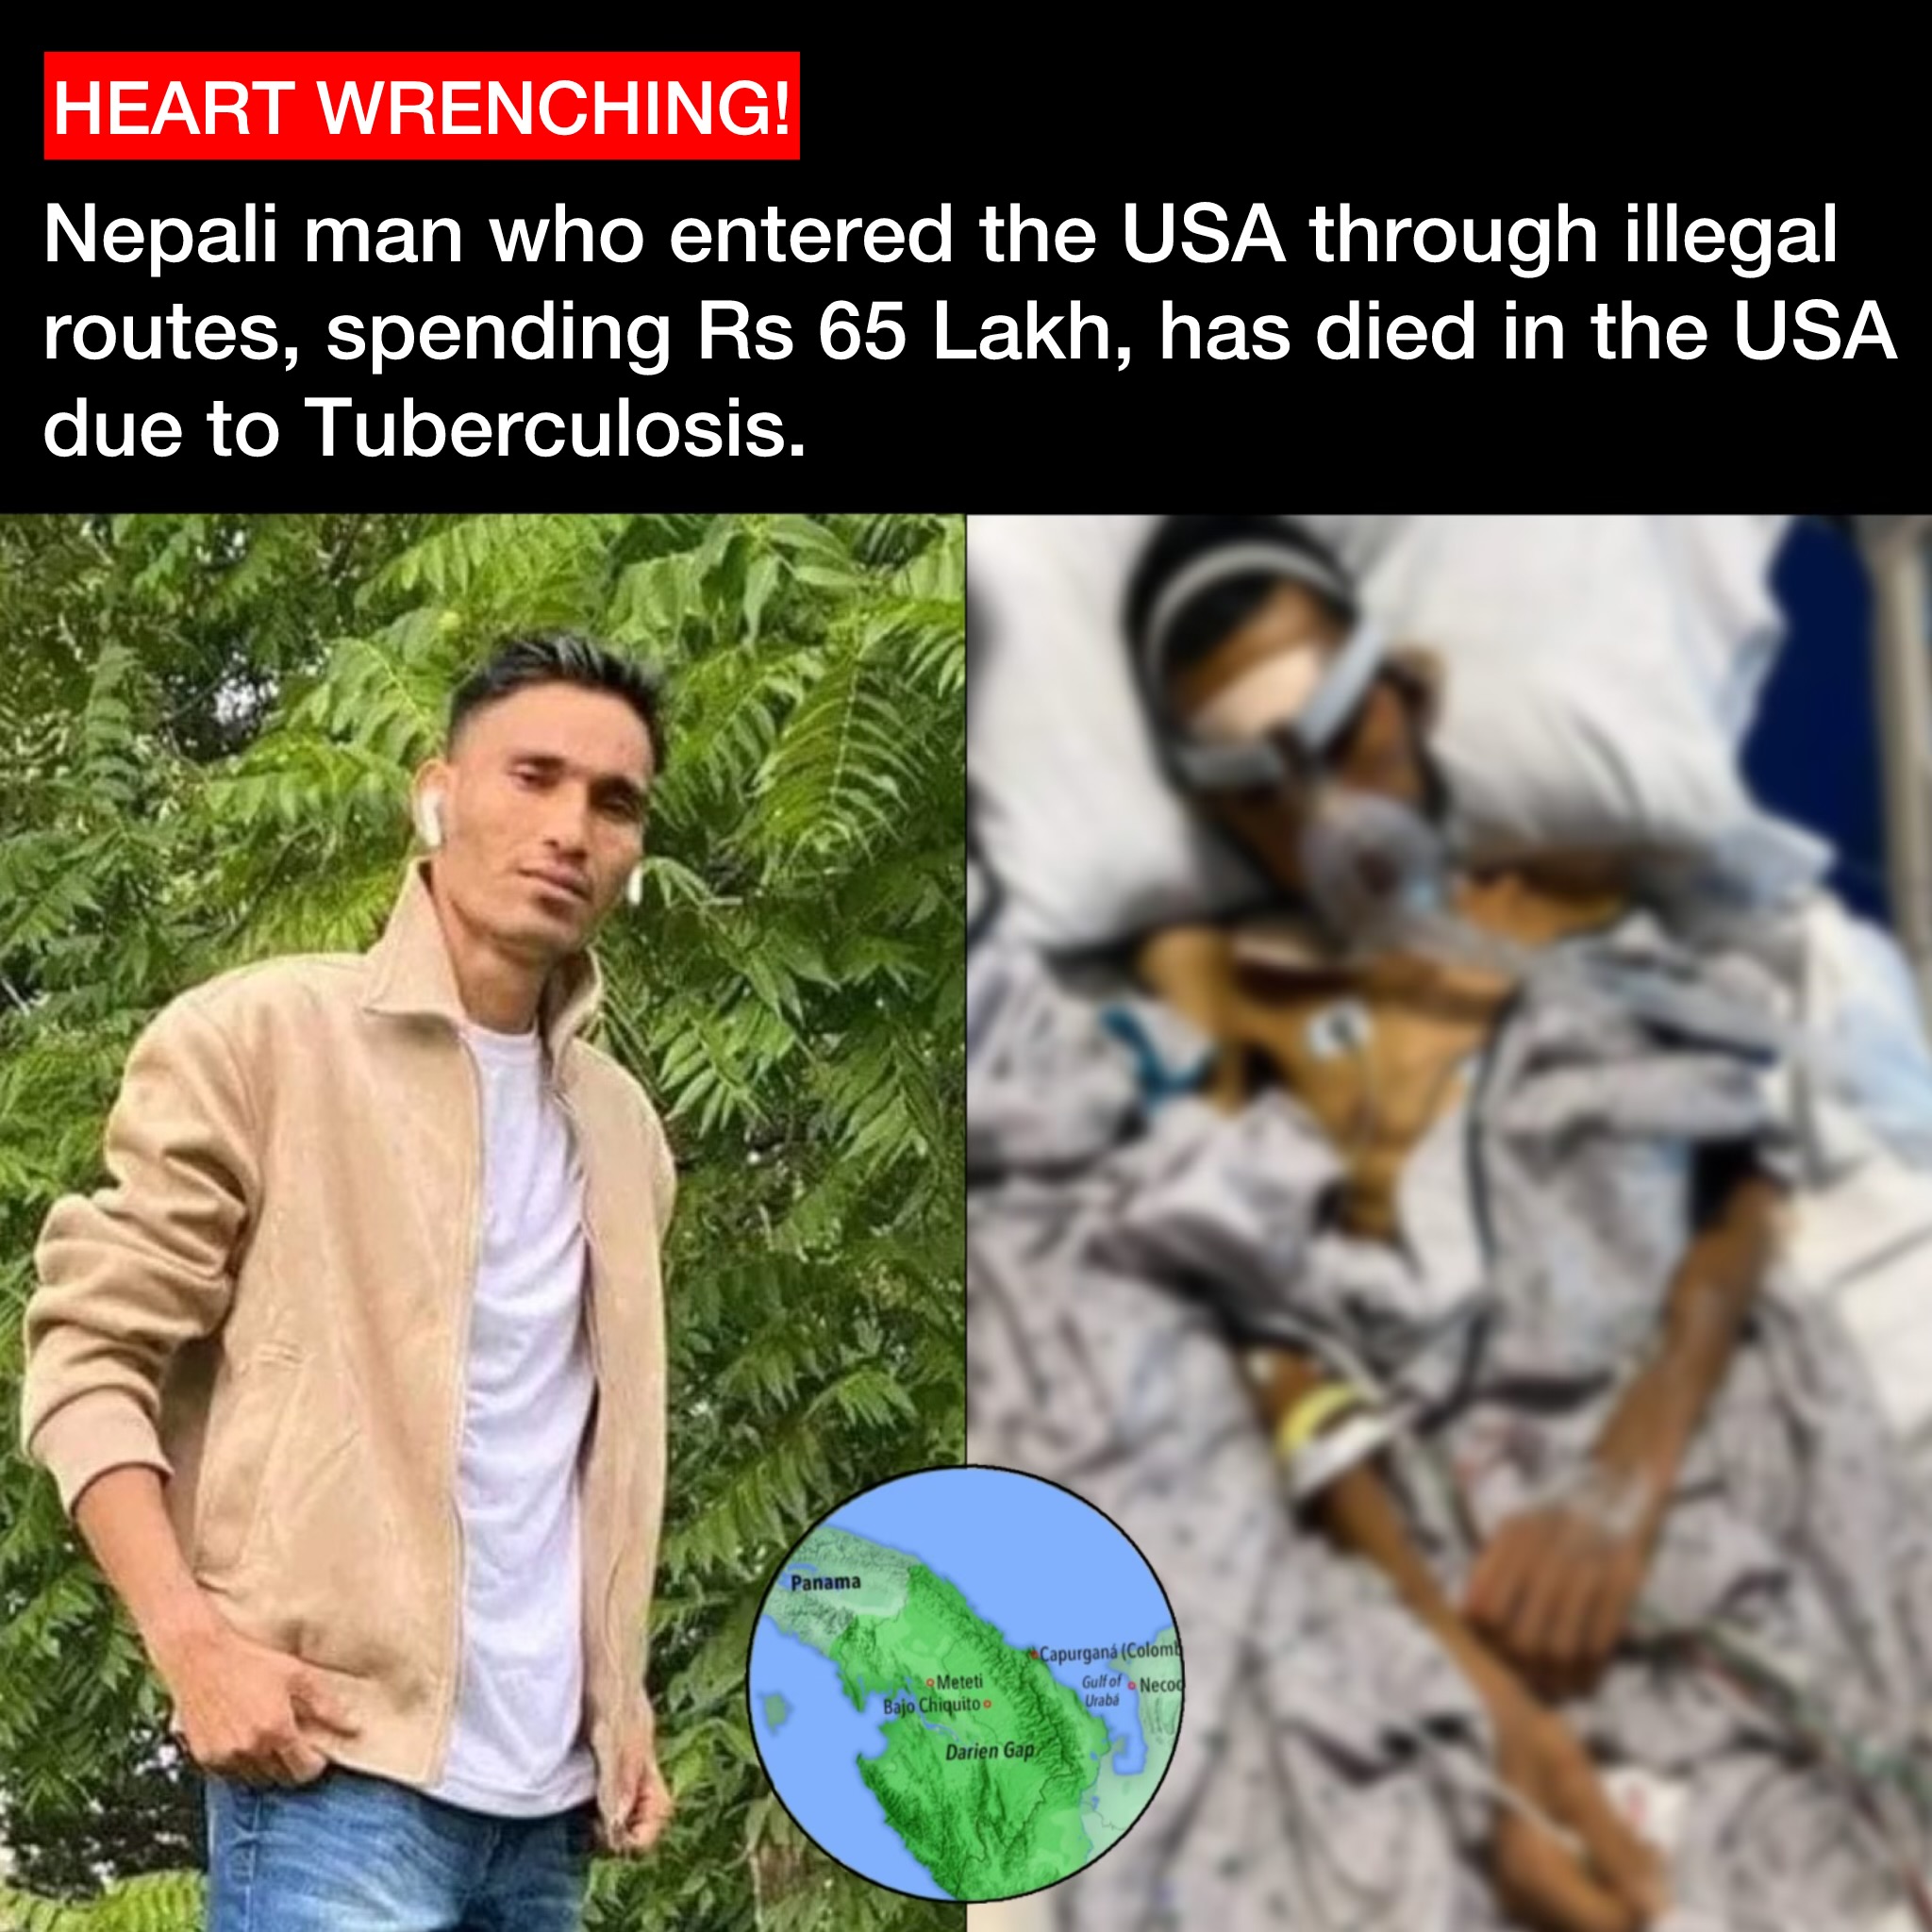 Nepali Man Who Entered The USA Illegally at Rs 65 Lakh Dies Due Tuberculosis